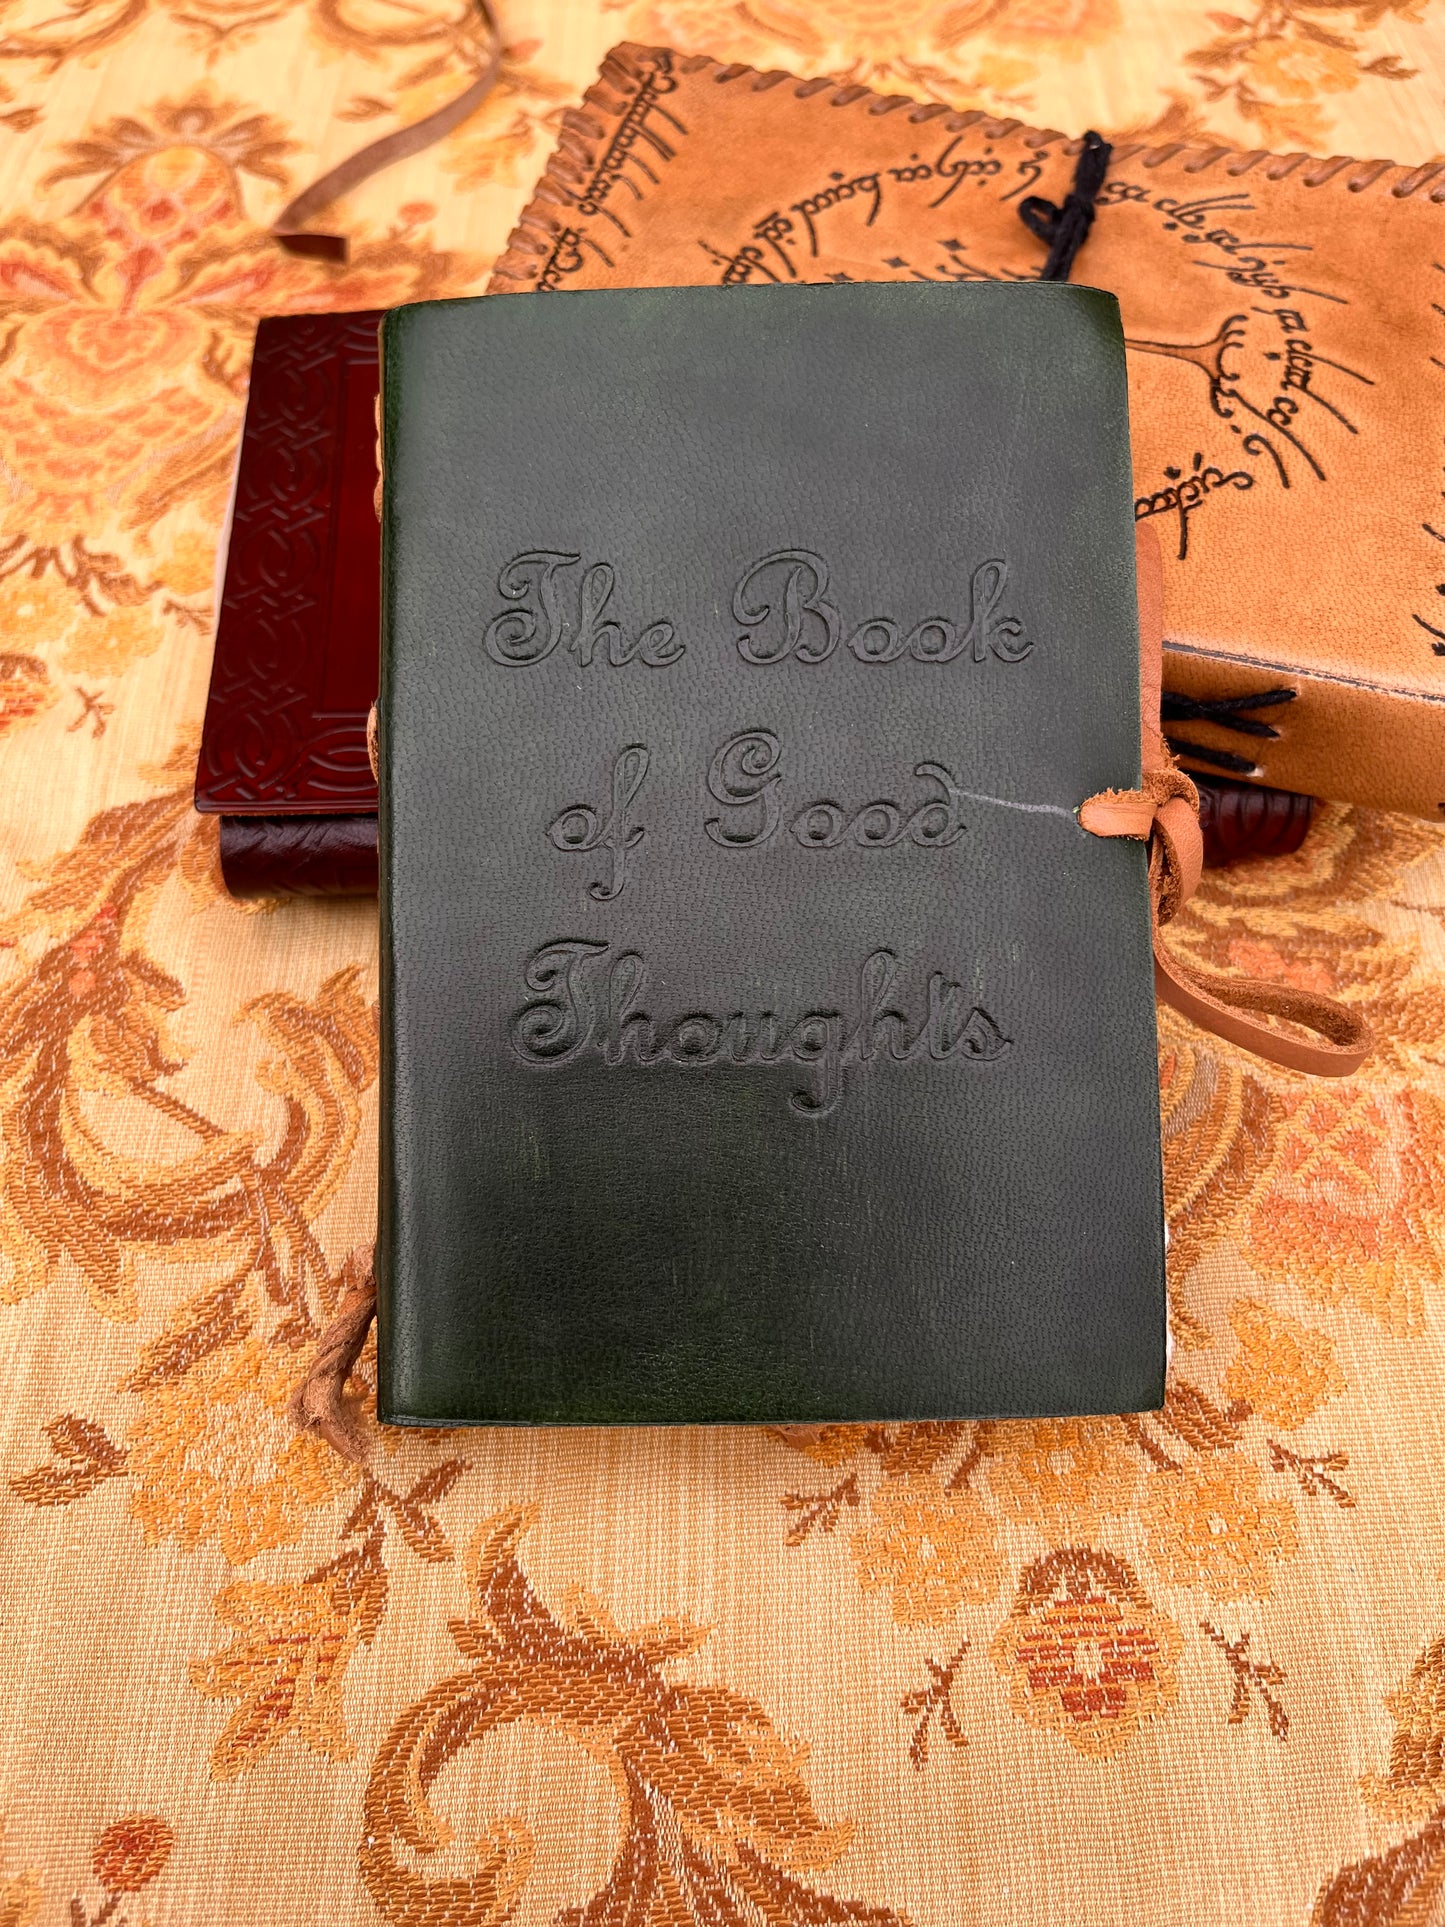 Book of Good Thoughts - Green Leather Journal